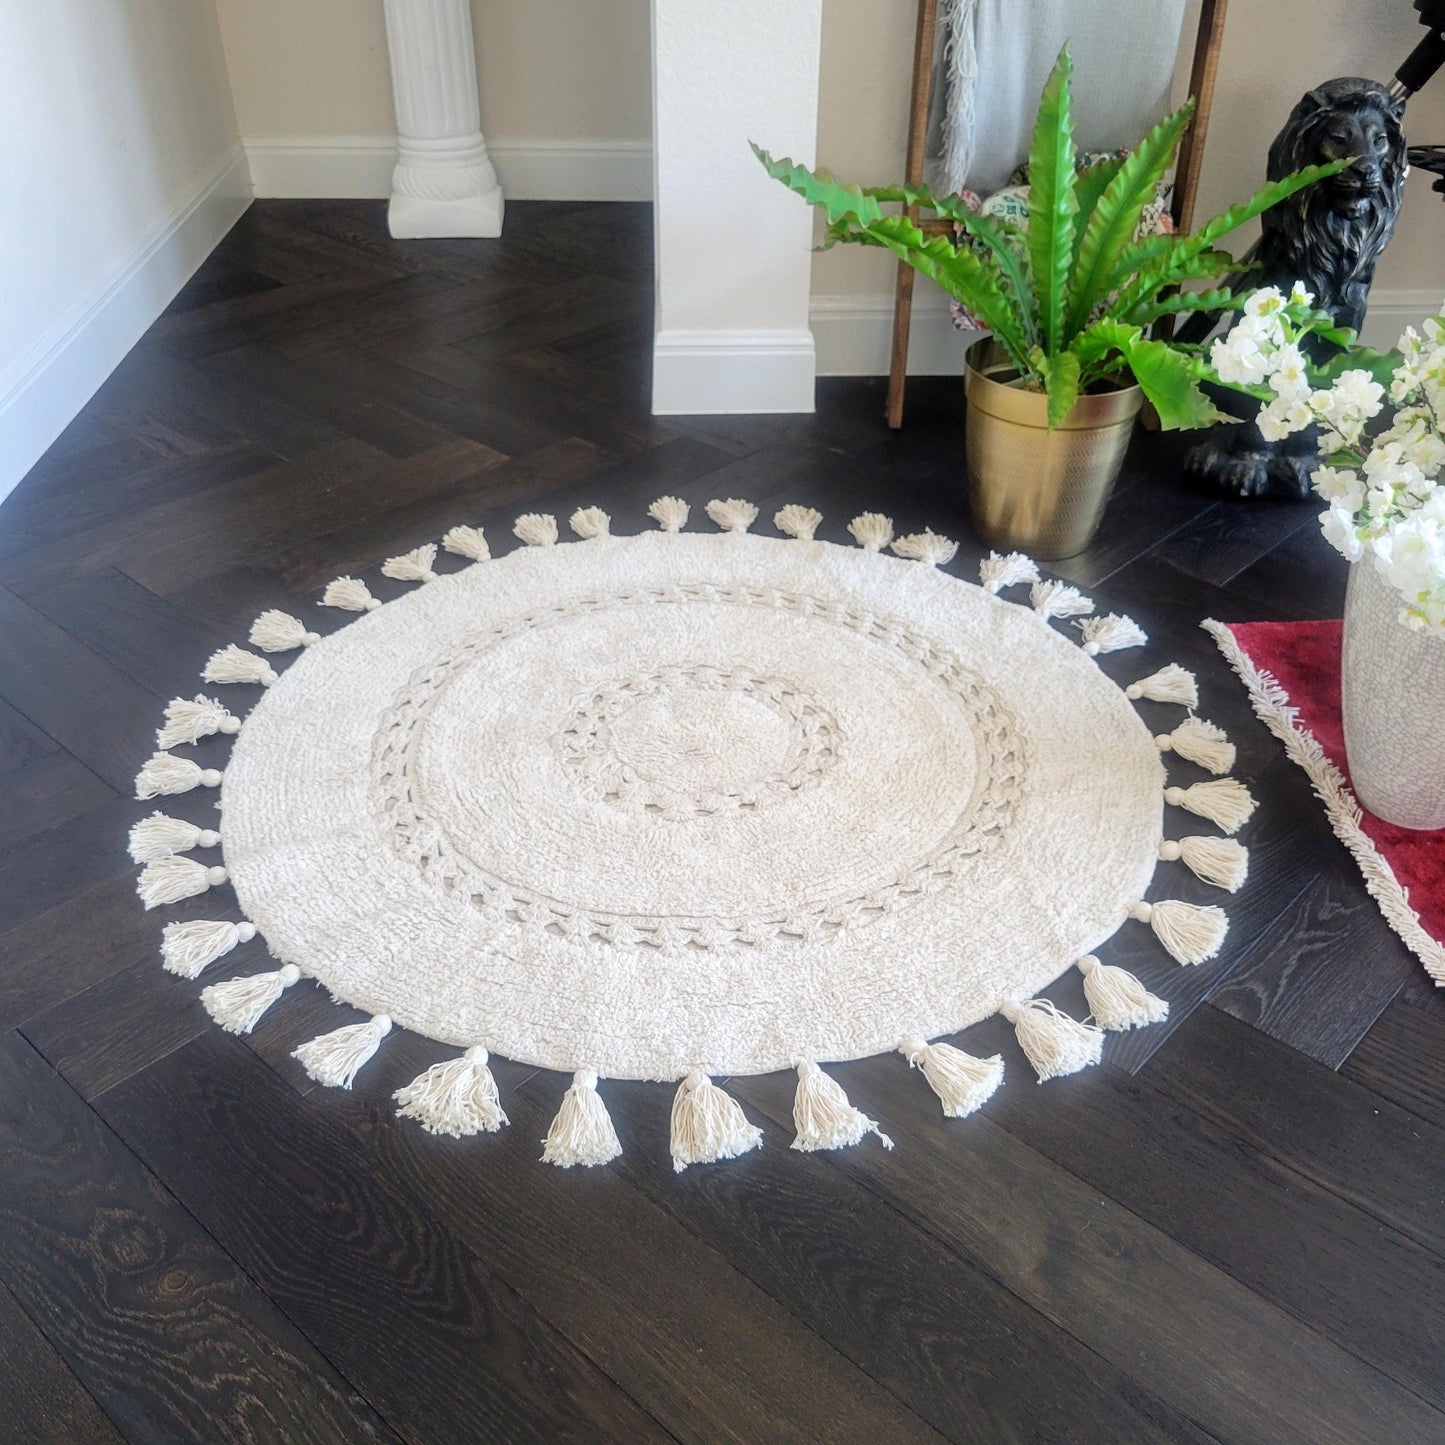 100% Non-Toxic Cotton Boho Round Crocheted Bath Rug with Tassels - Extra Large - MAIA HOMES